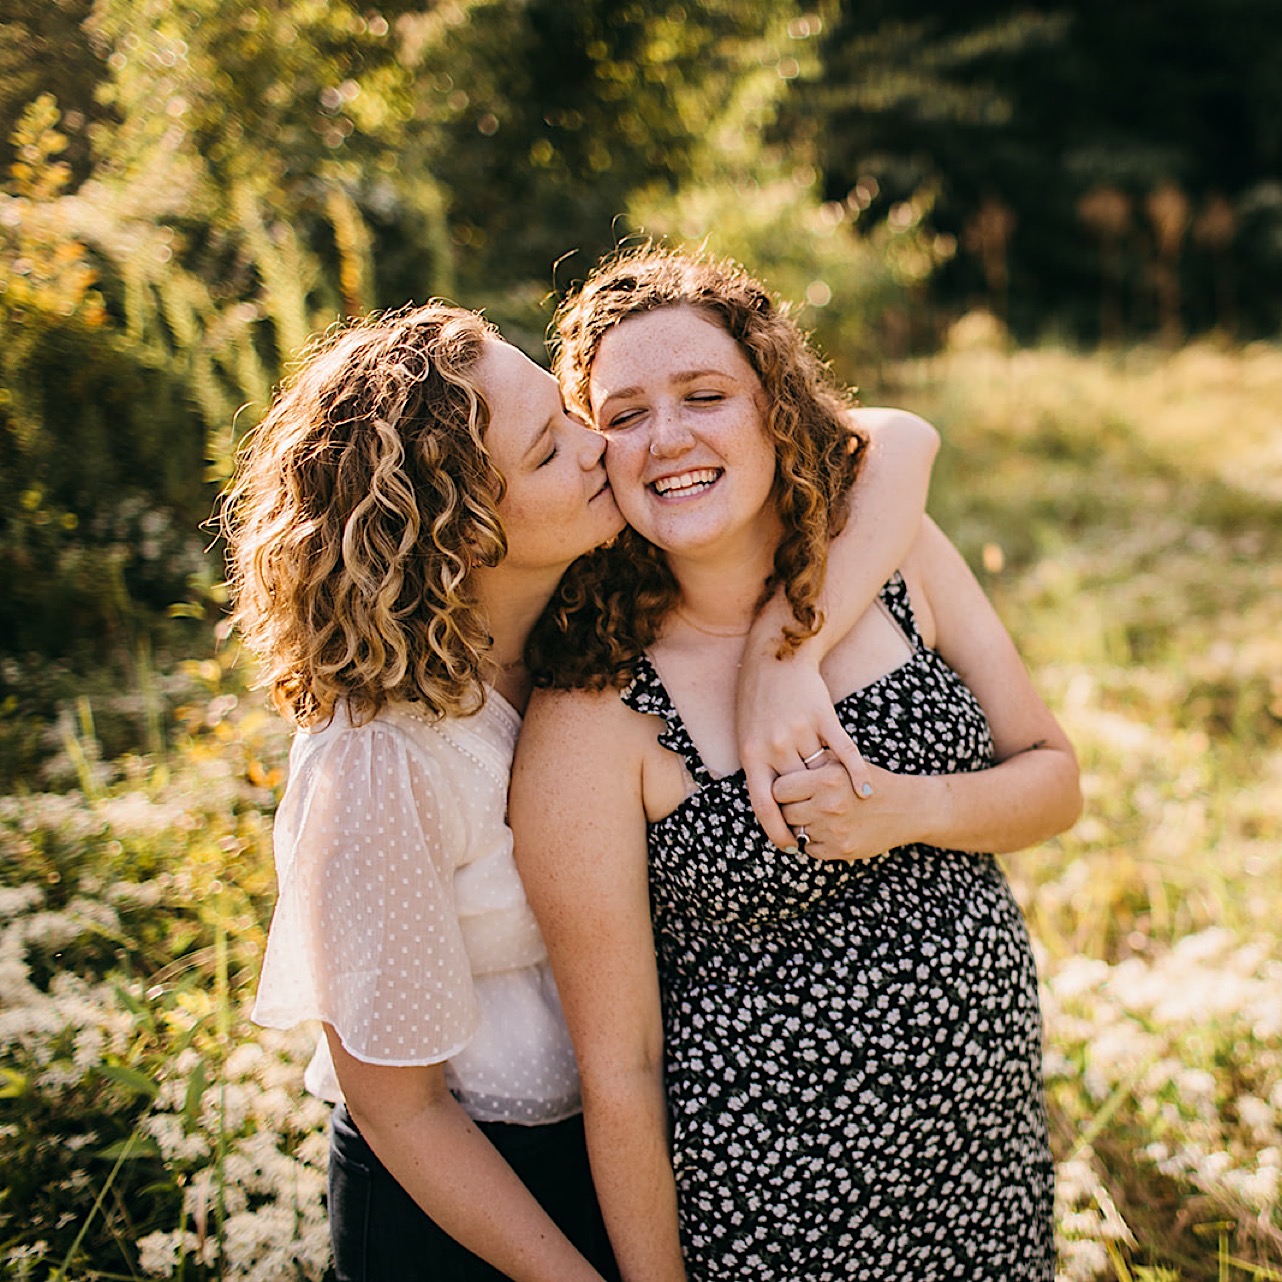 An engaged lesbian couple poses together in a field of Tennessee wildflowers.